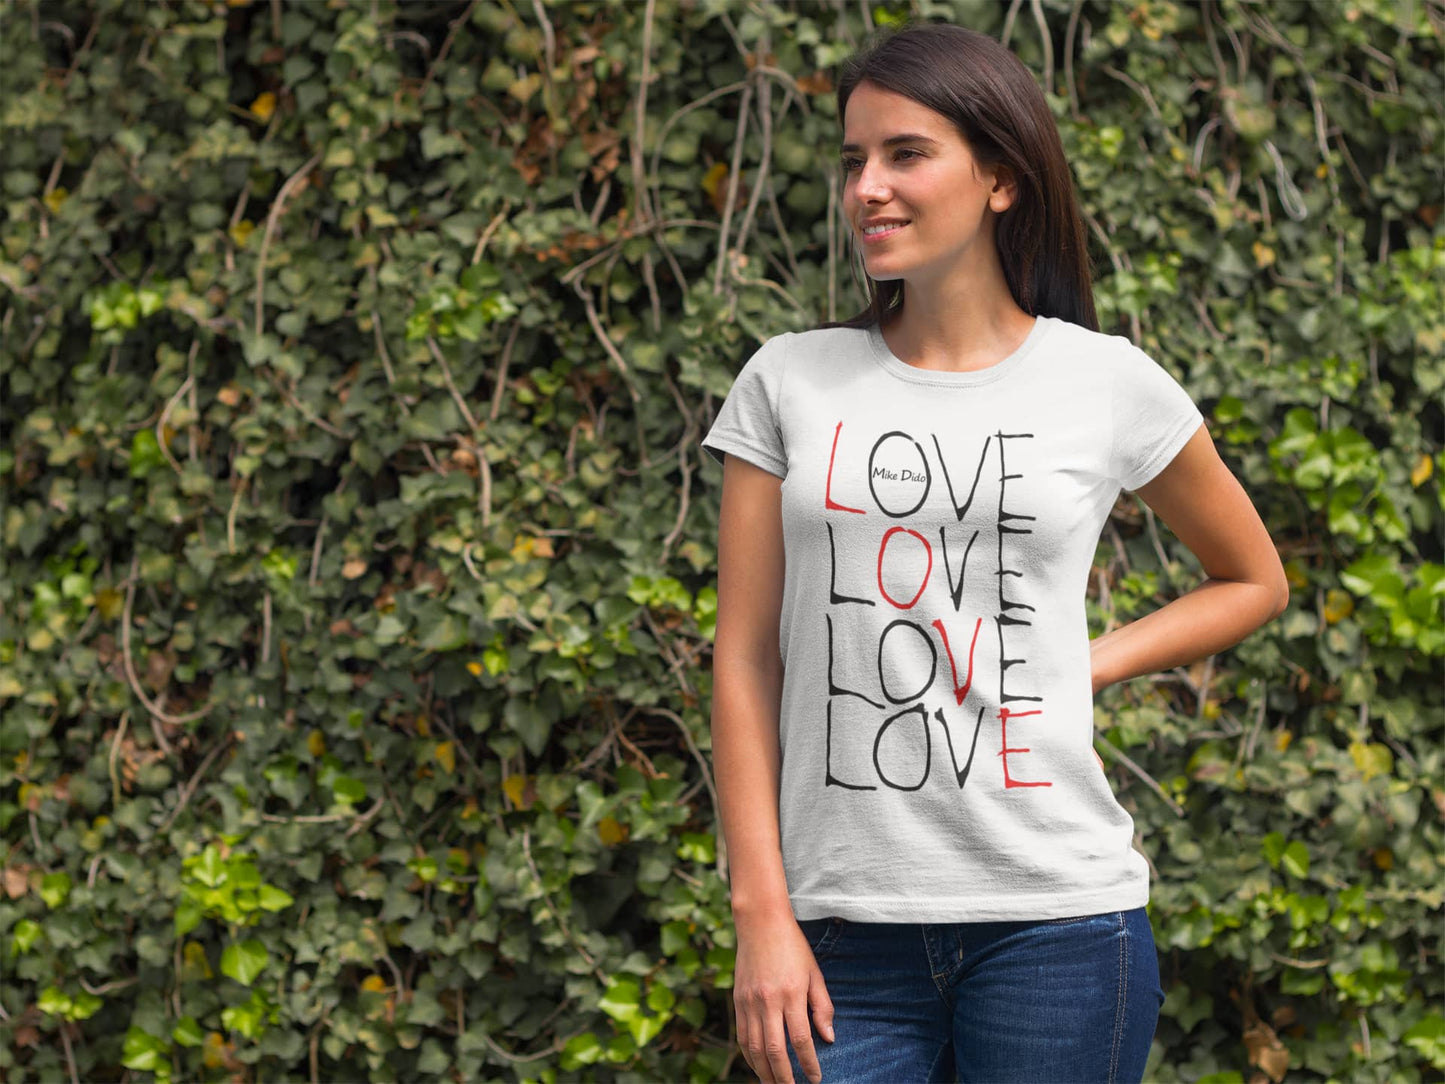 Basic T-Shirt With Love Word by Mike Dido